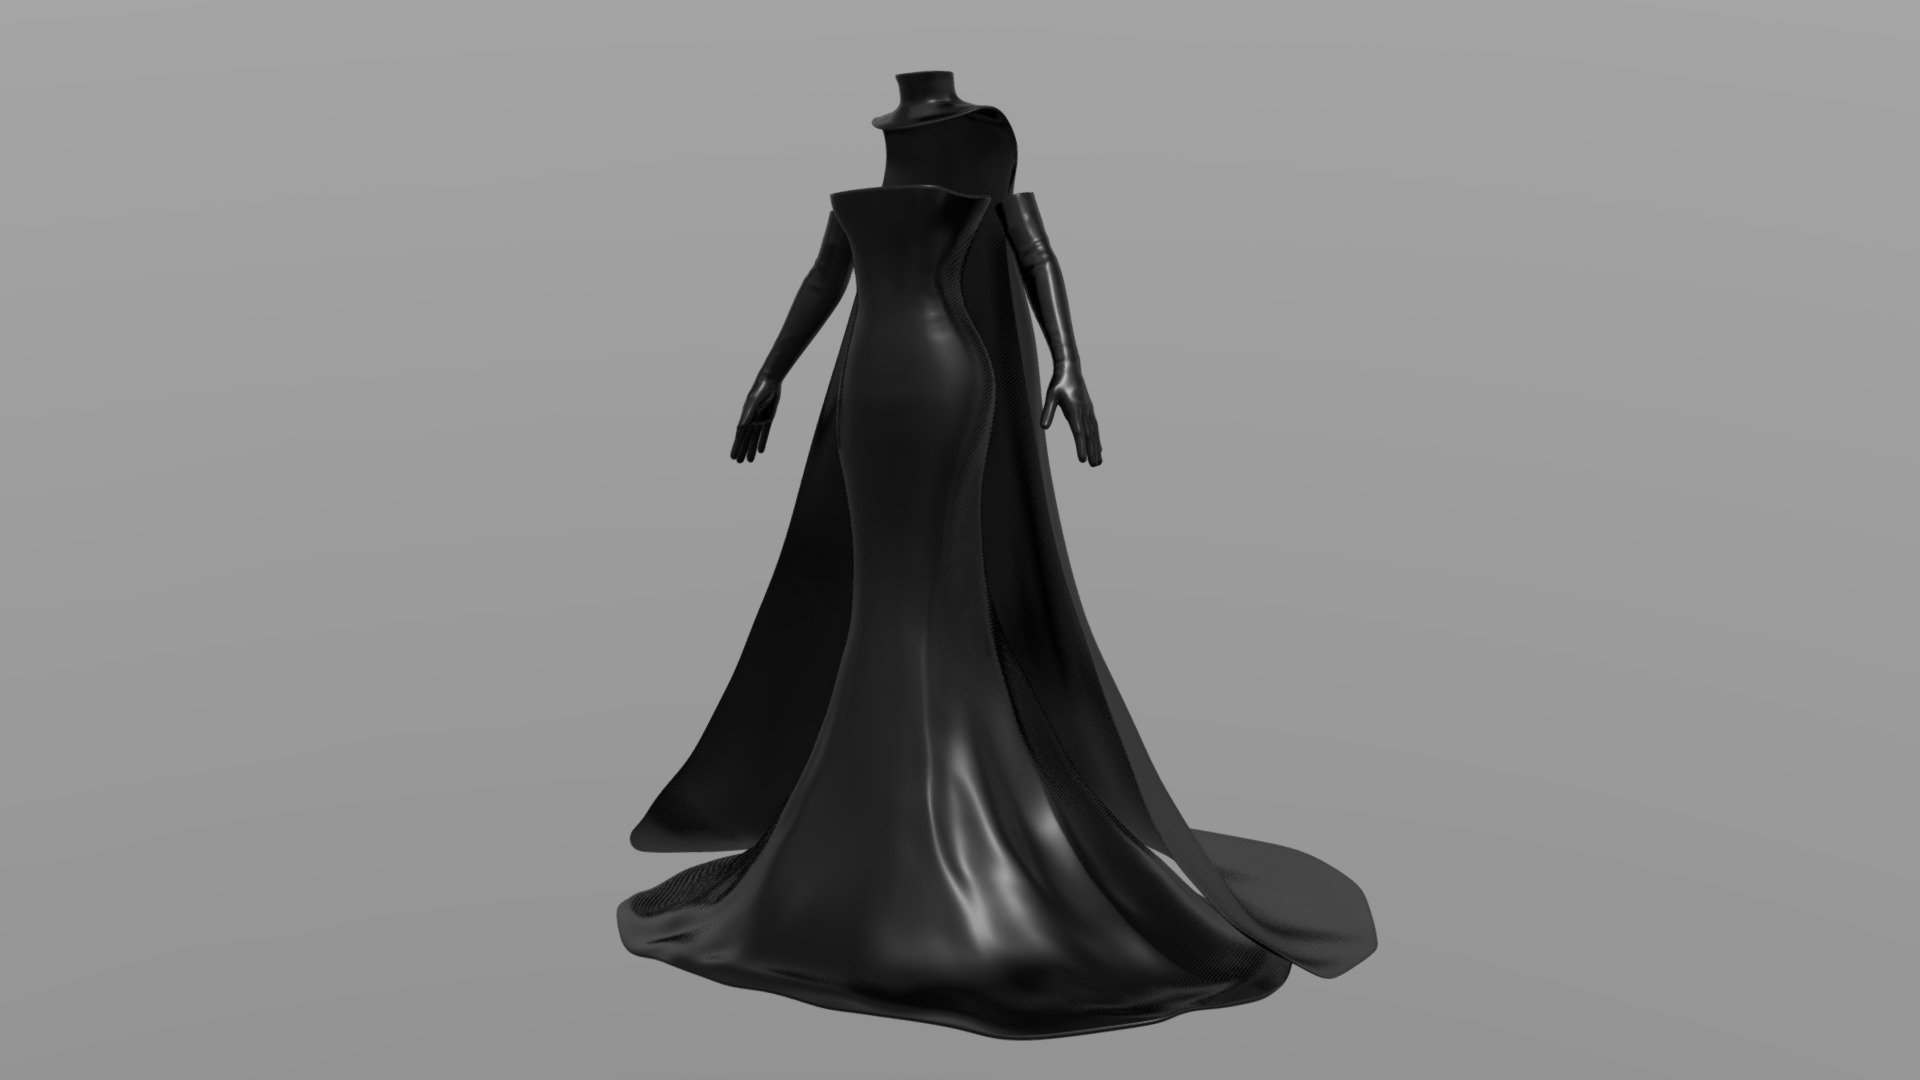 full outfit with dress, cape and gloves. FBX 3d model